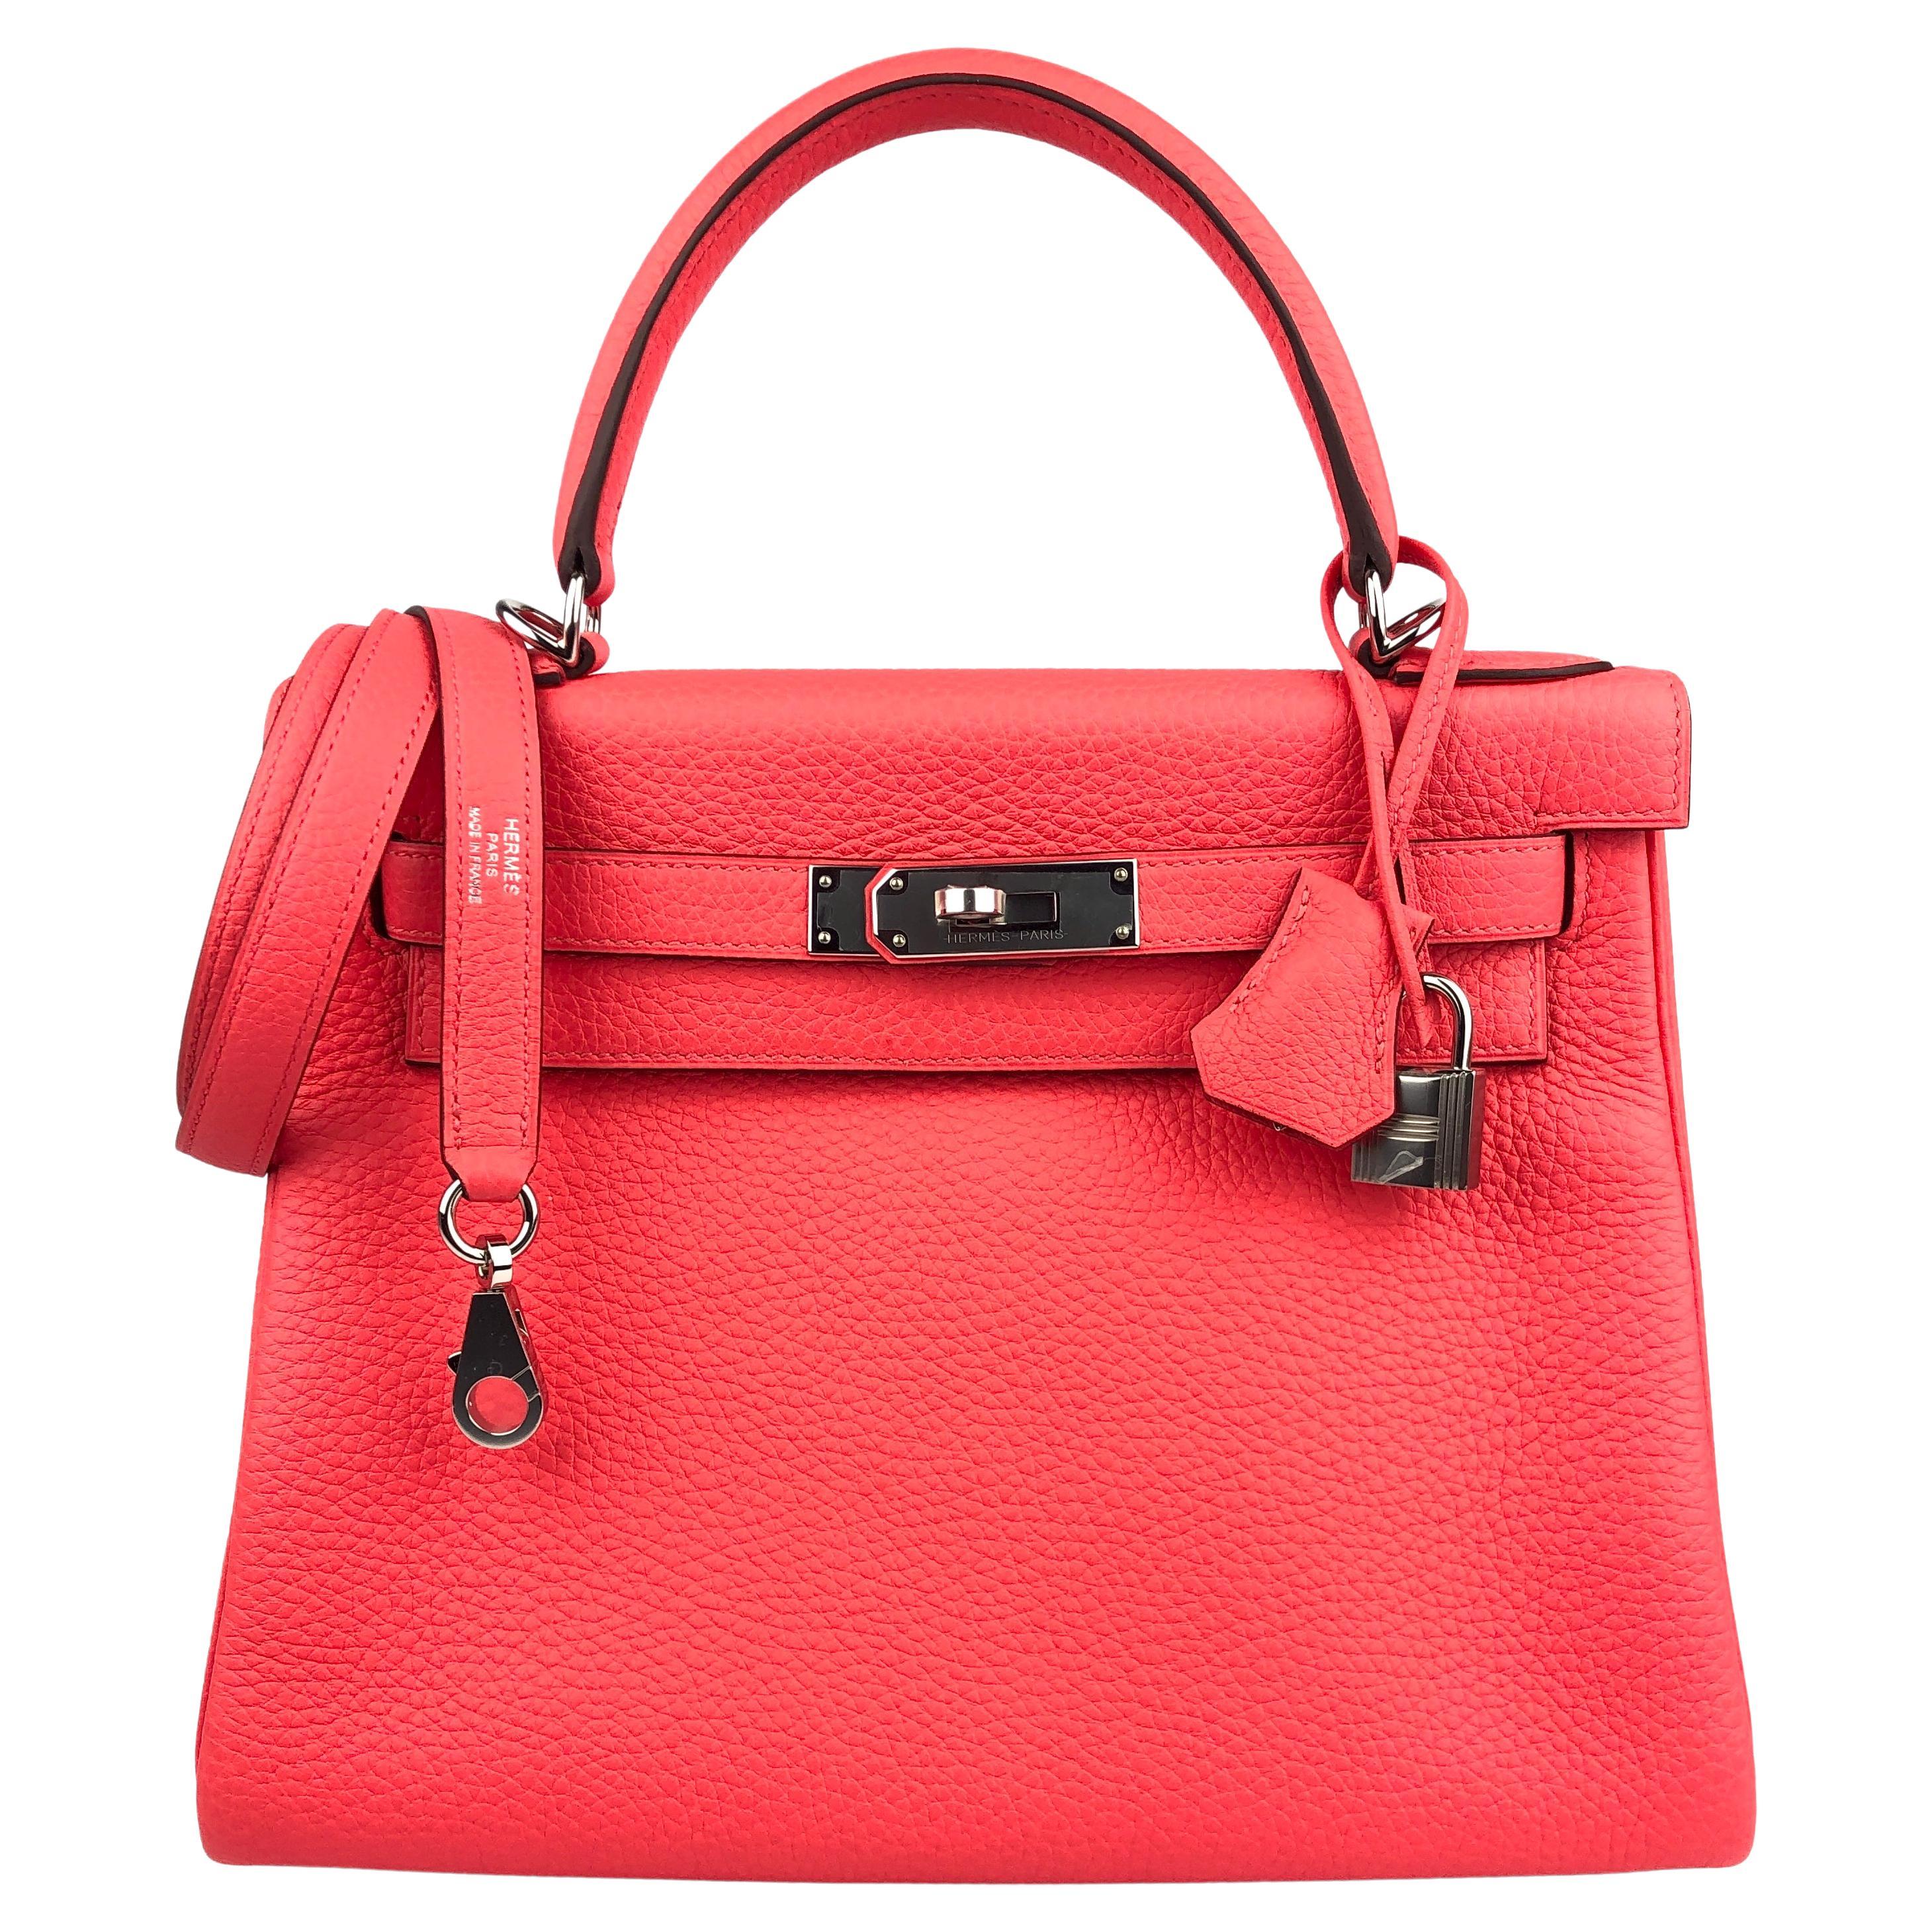 Hermes Kelly 28 Rose Texas Pink Leather Palladium Hardware NEW For Sale